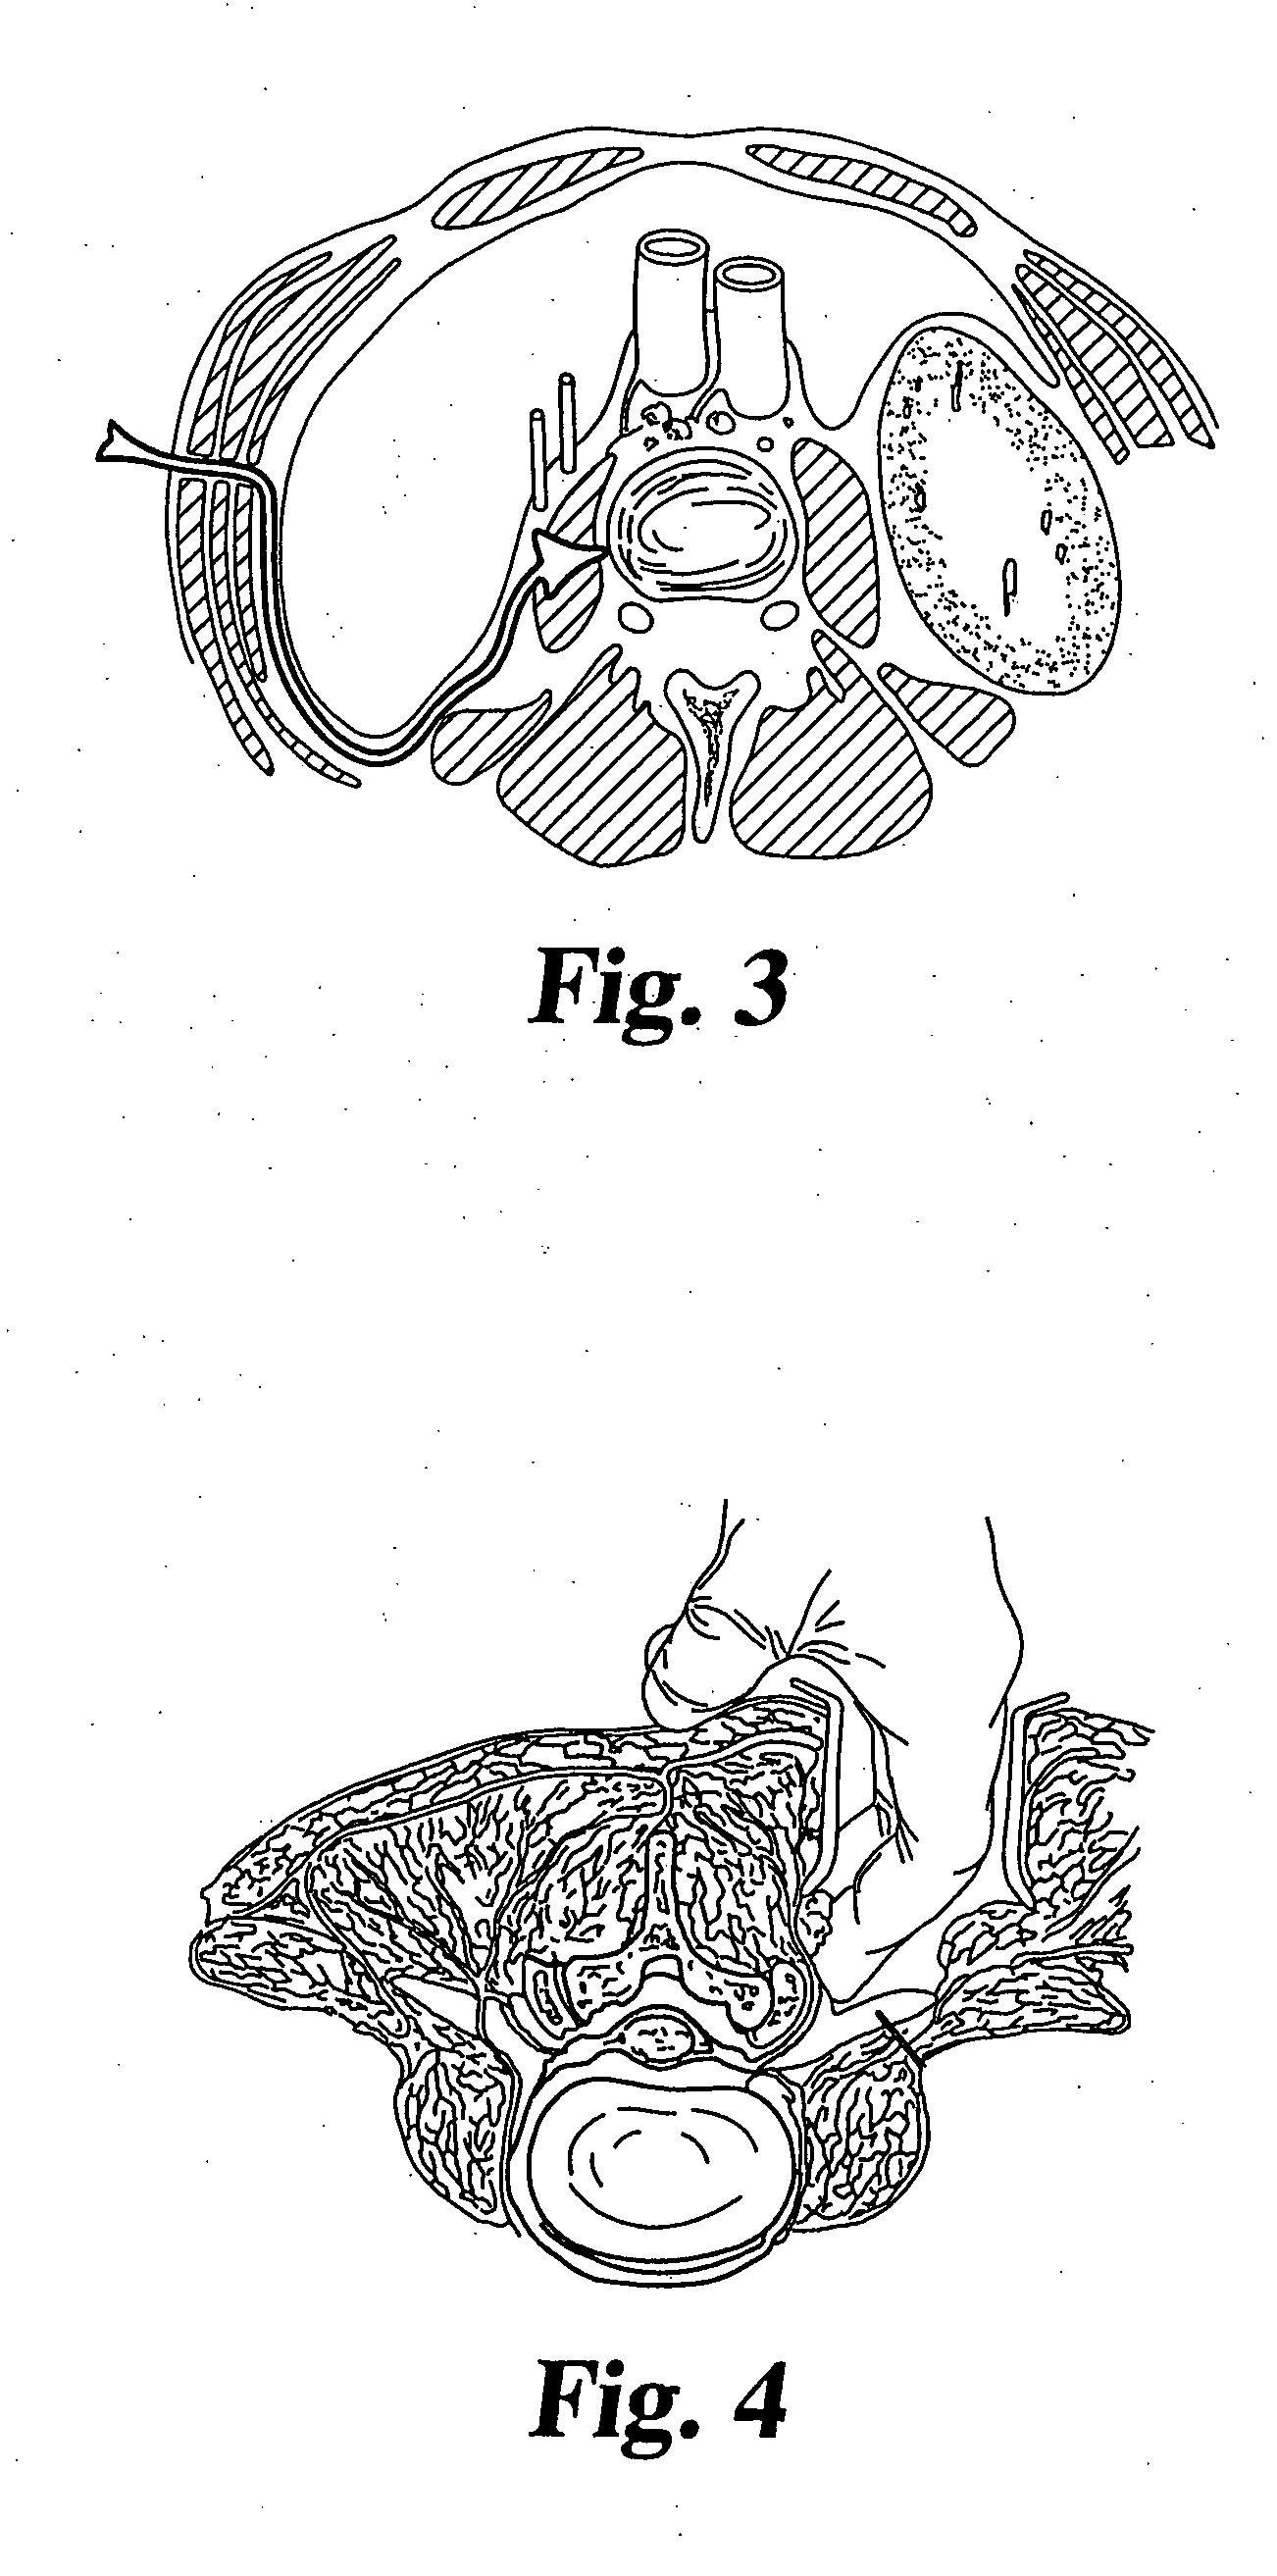 Methods for treating defects and injuries of an intervertebral disc